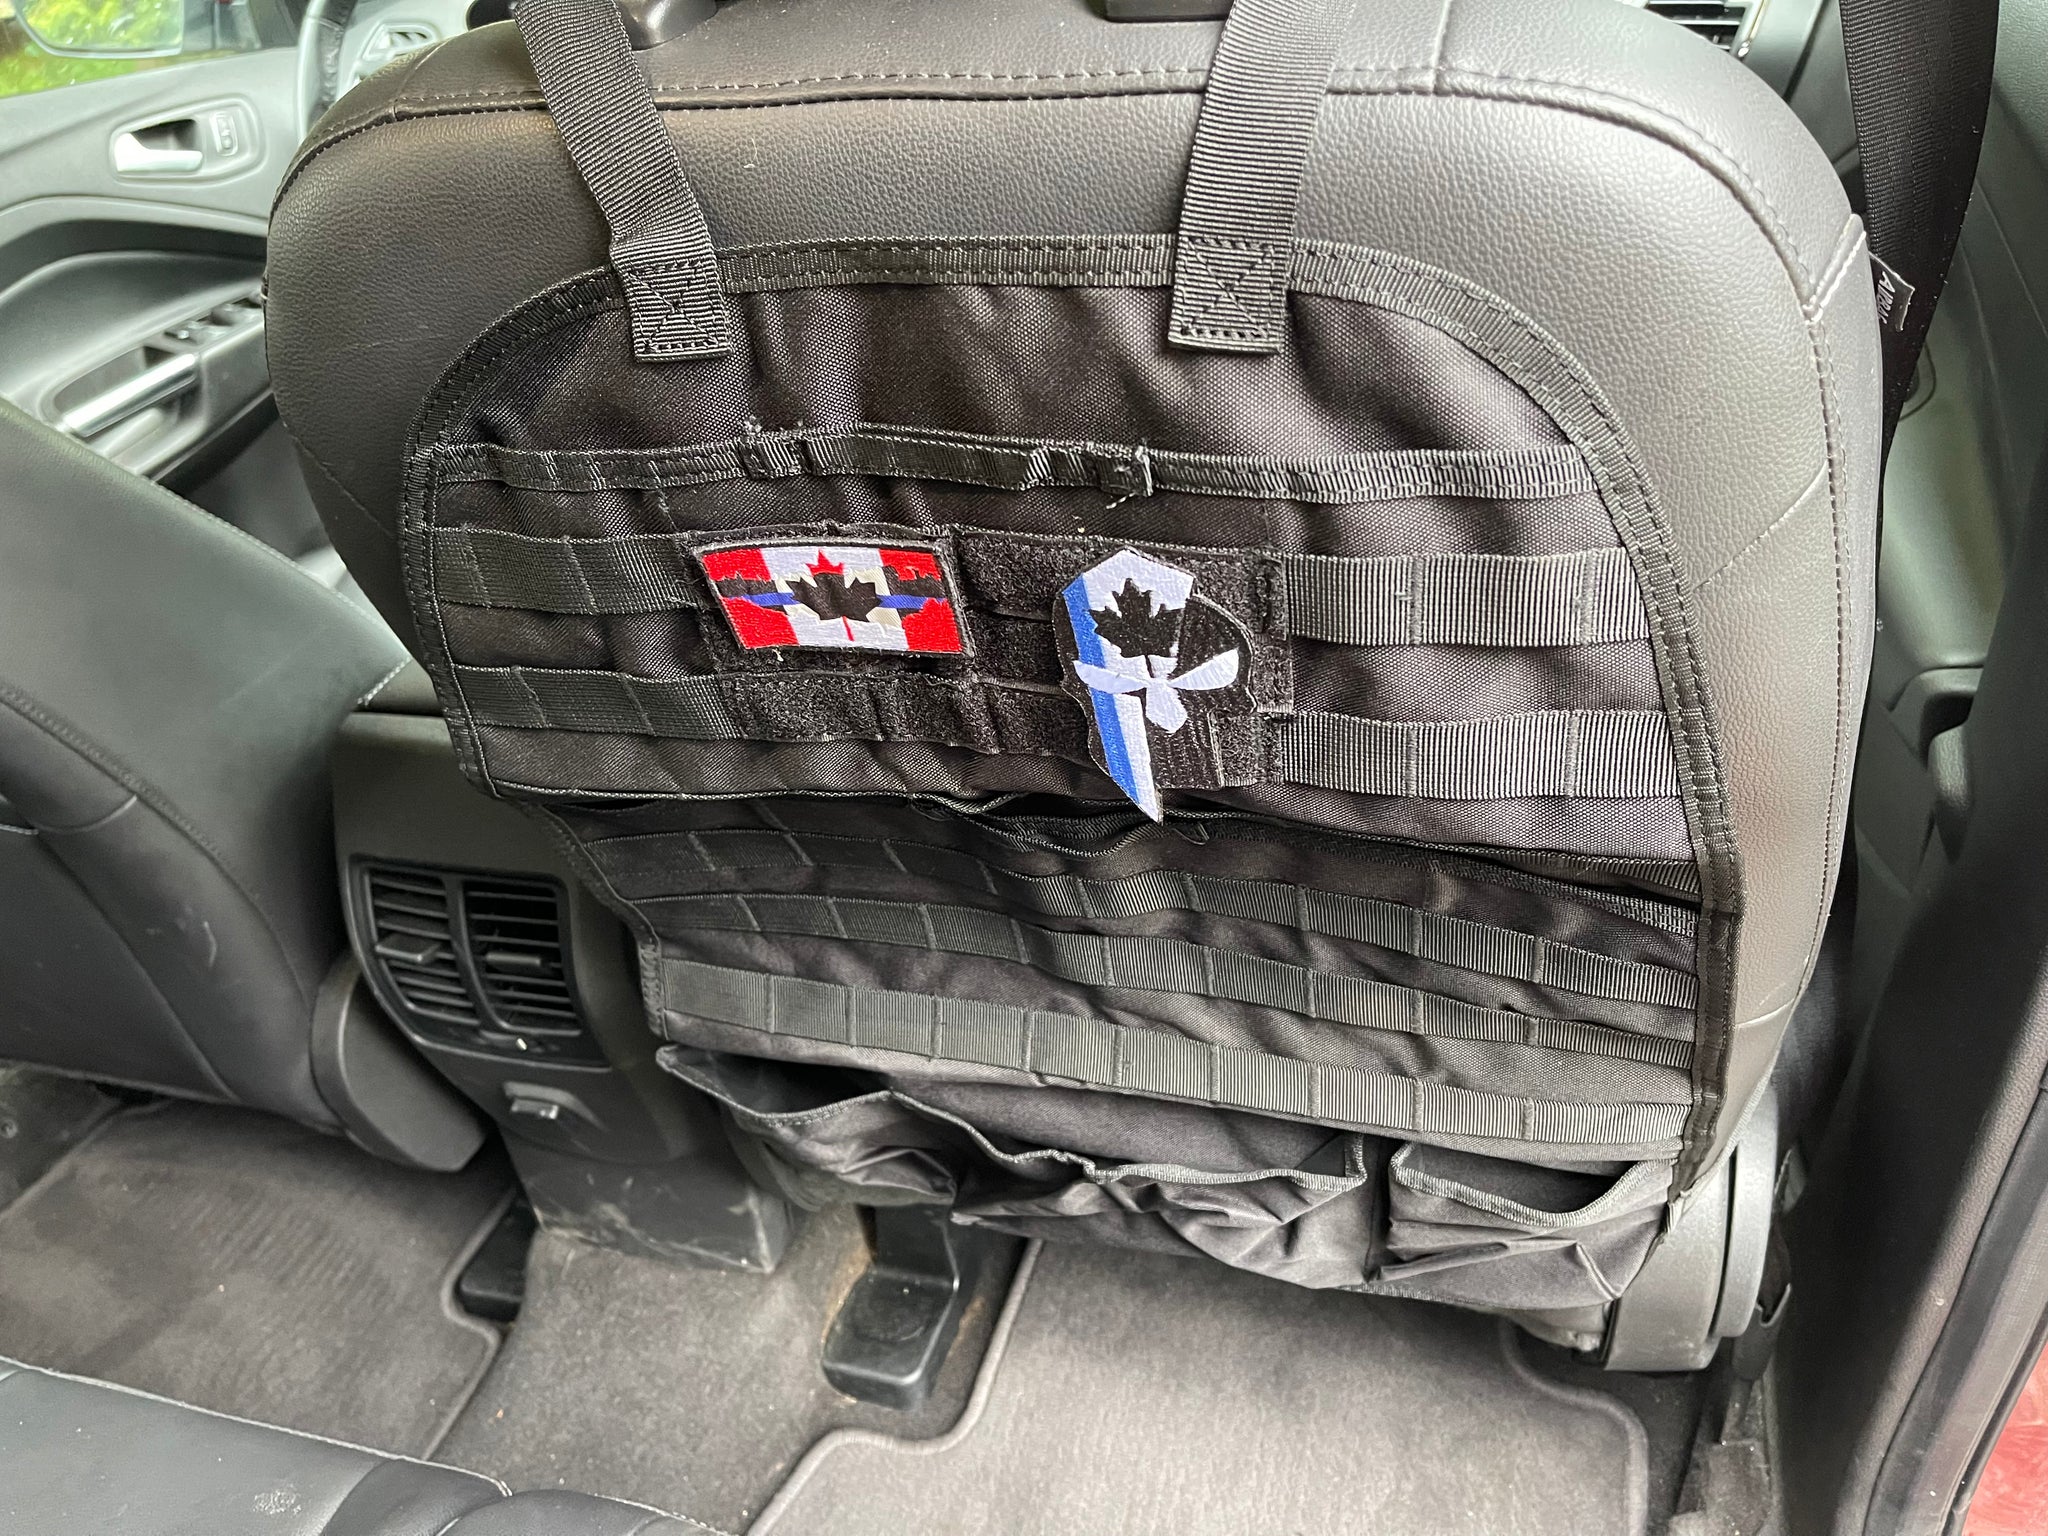 The Tactical MOLLE Car Seat Organizer is just a really cool